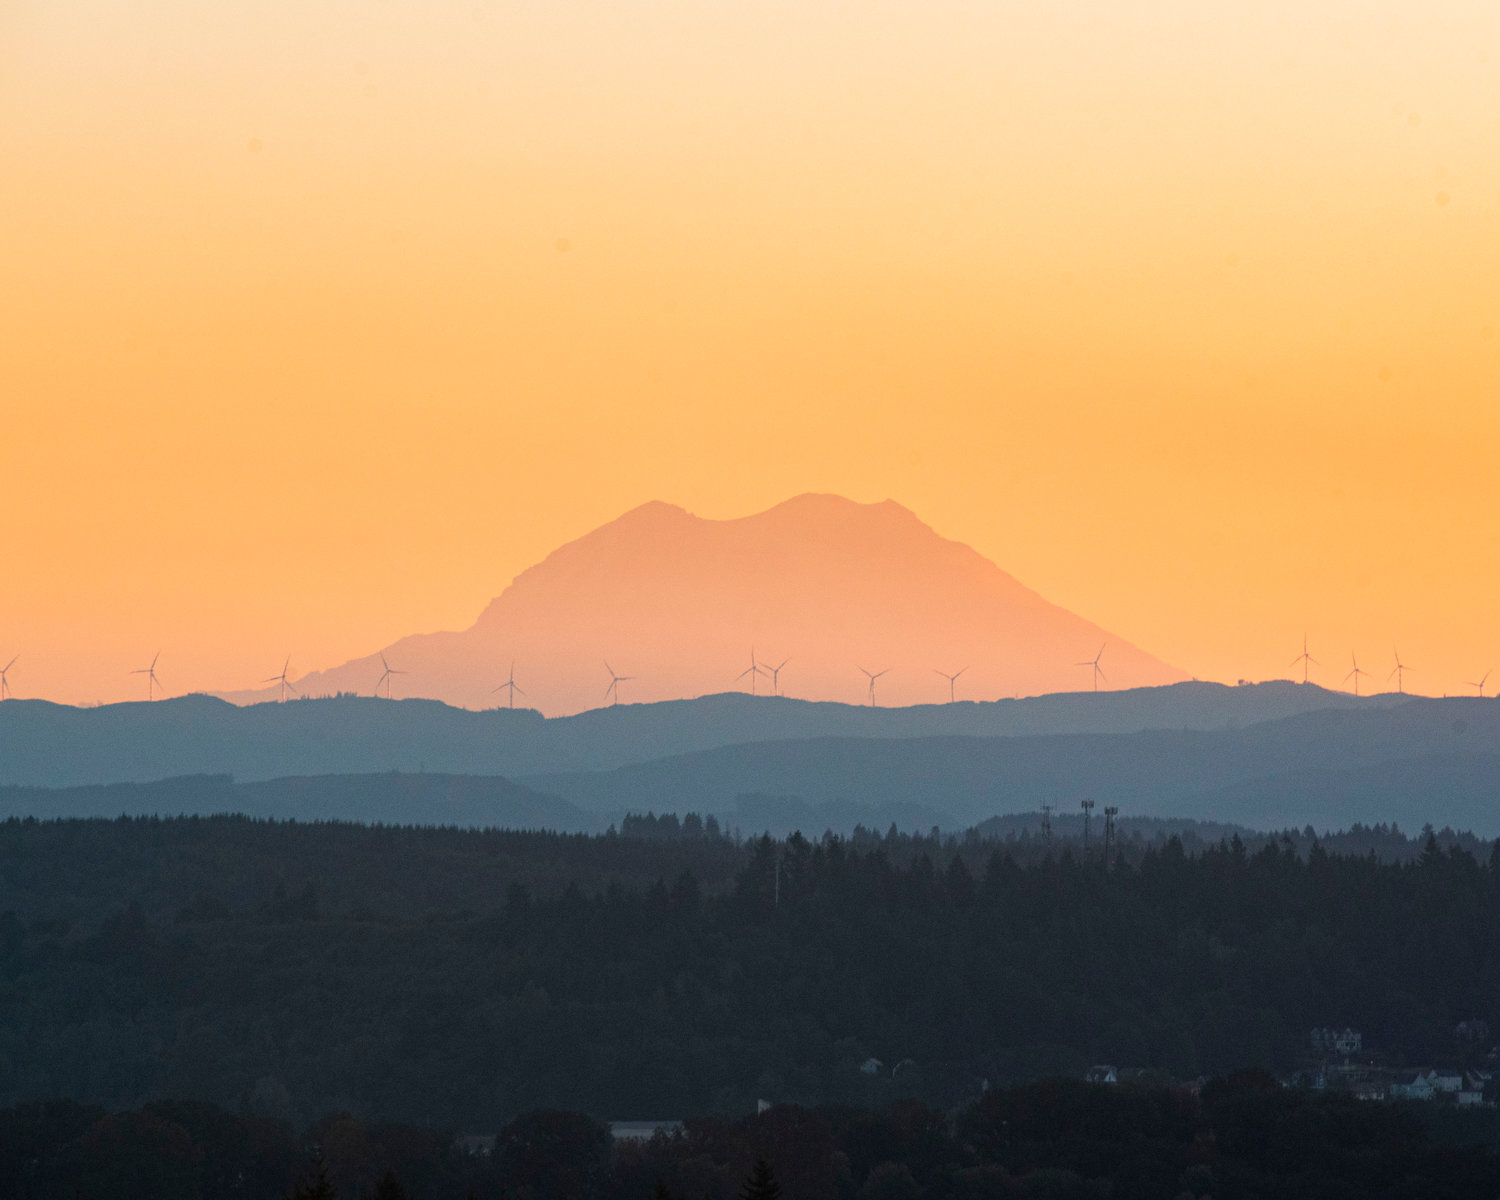 The sun rises over Chehalis and Mount Rainier Tuesday morning.